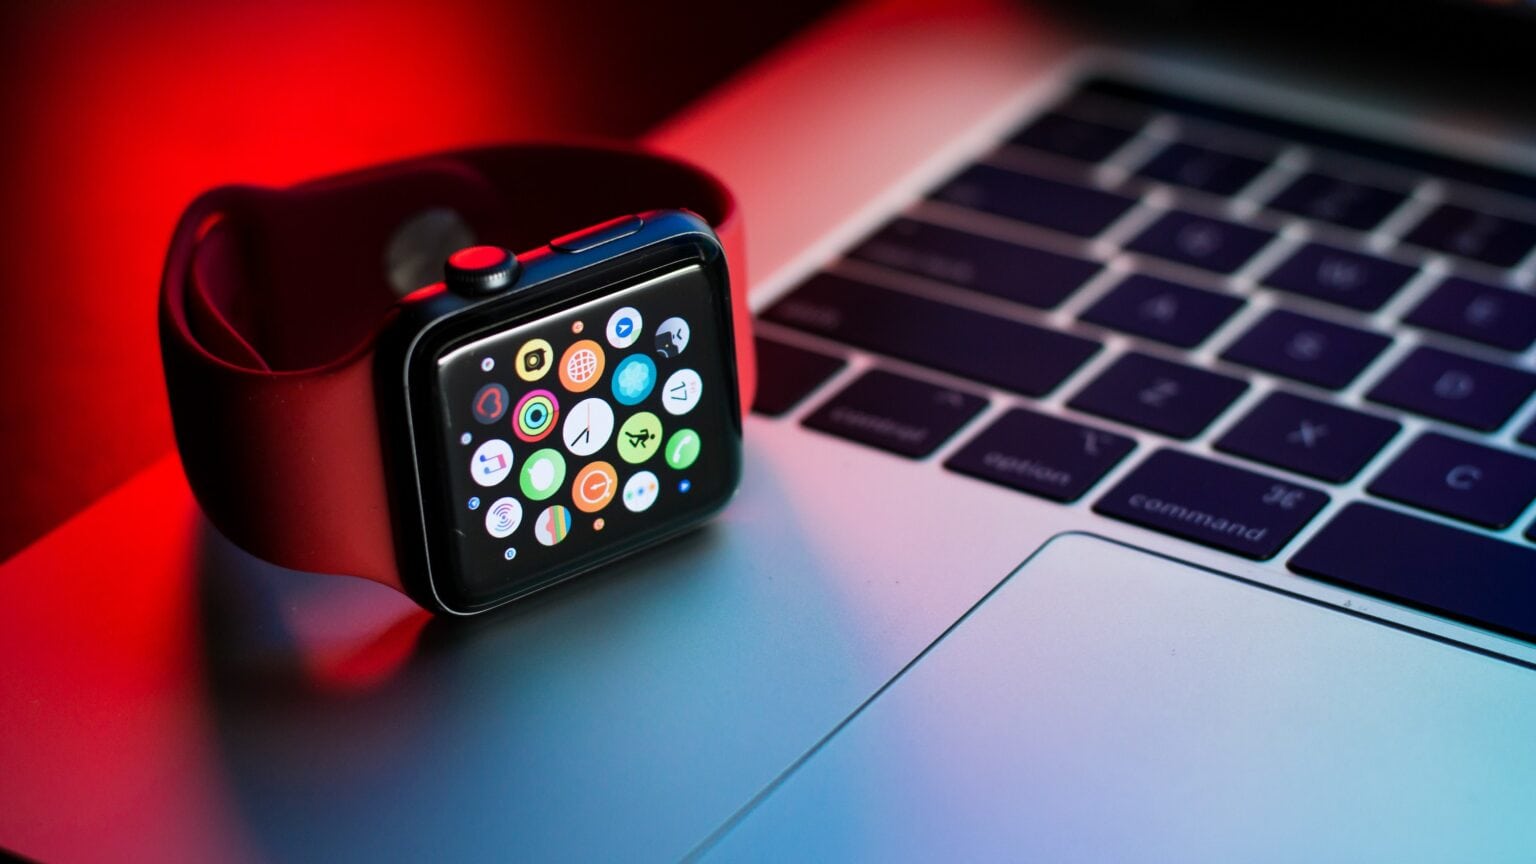 Apple Watch and MacBook